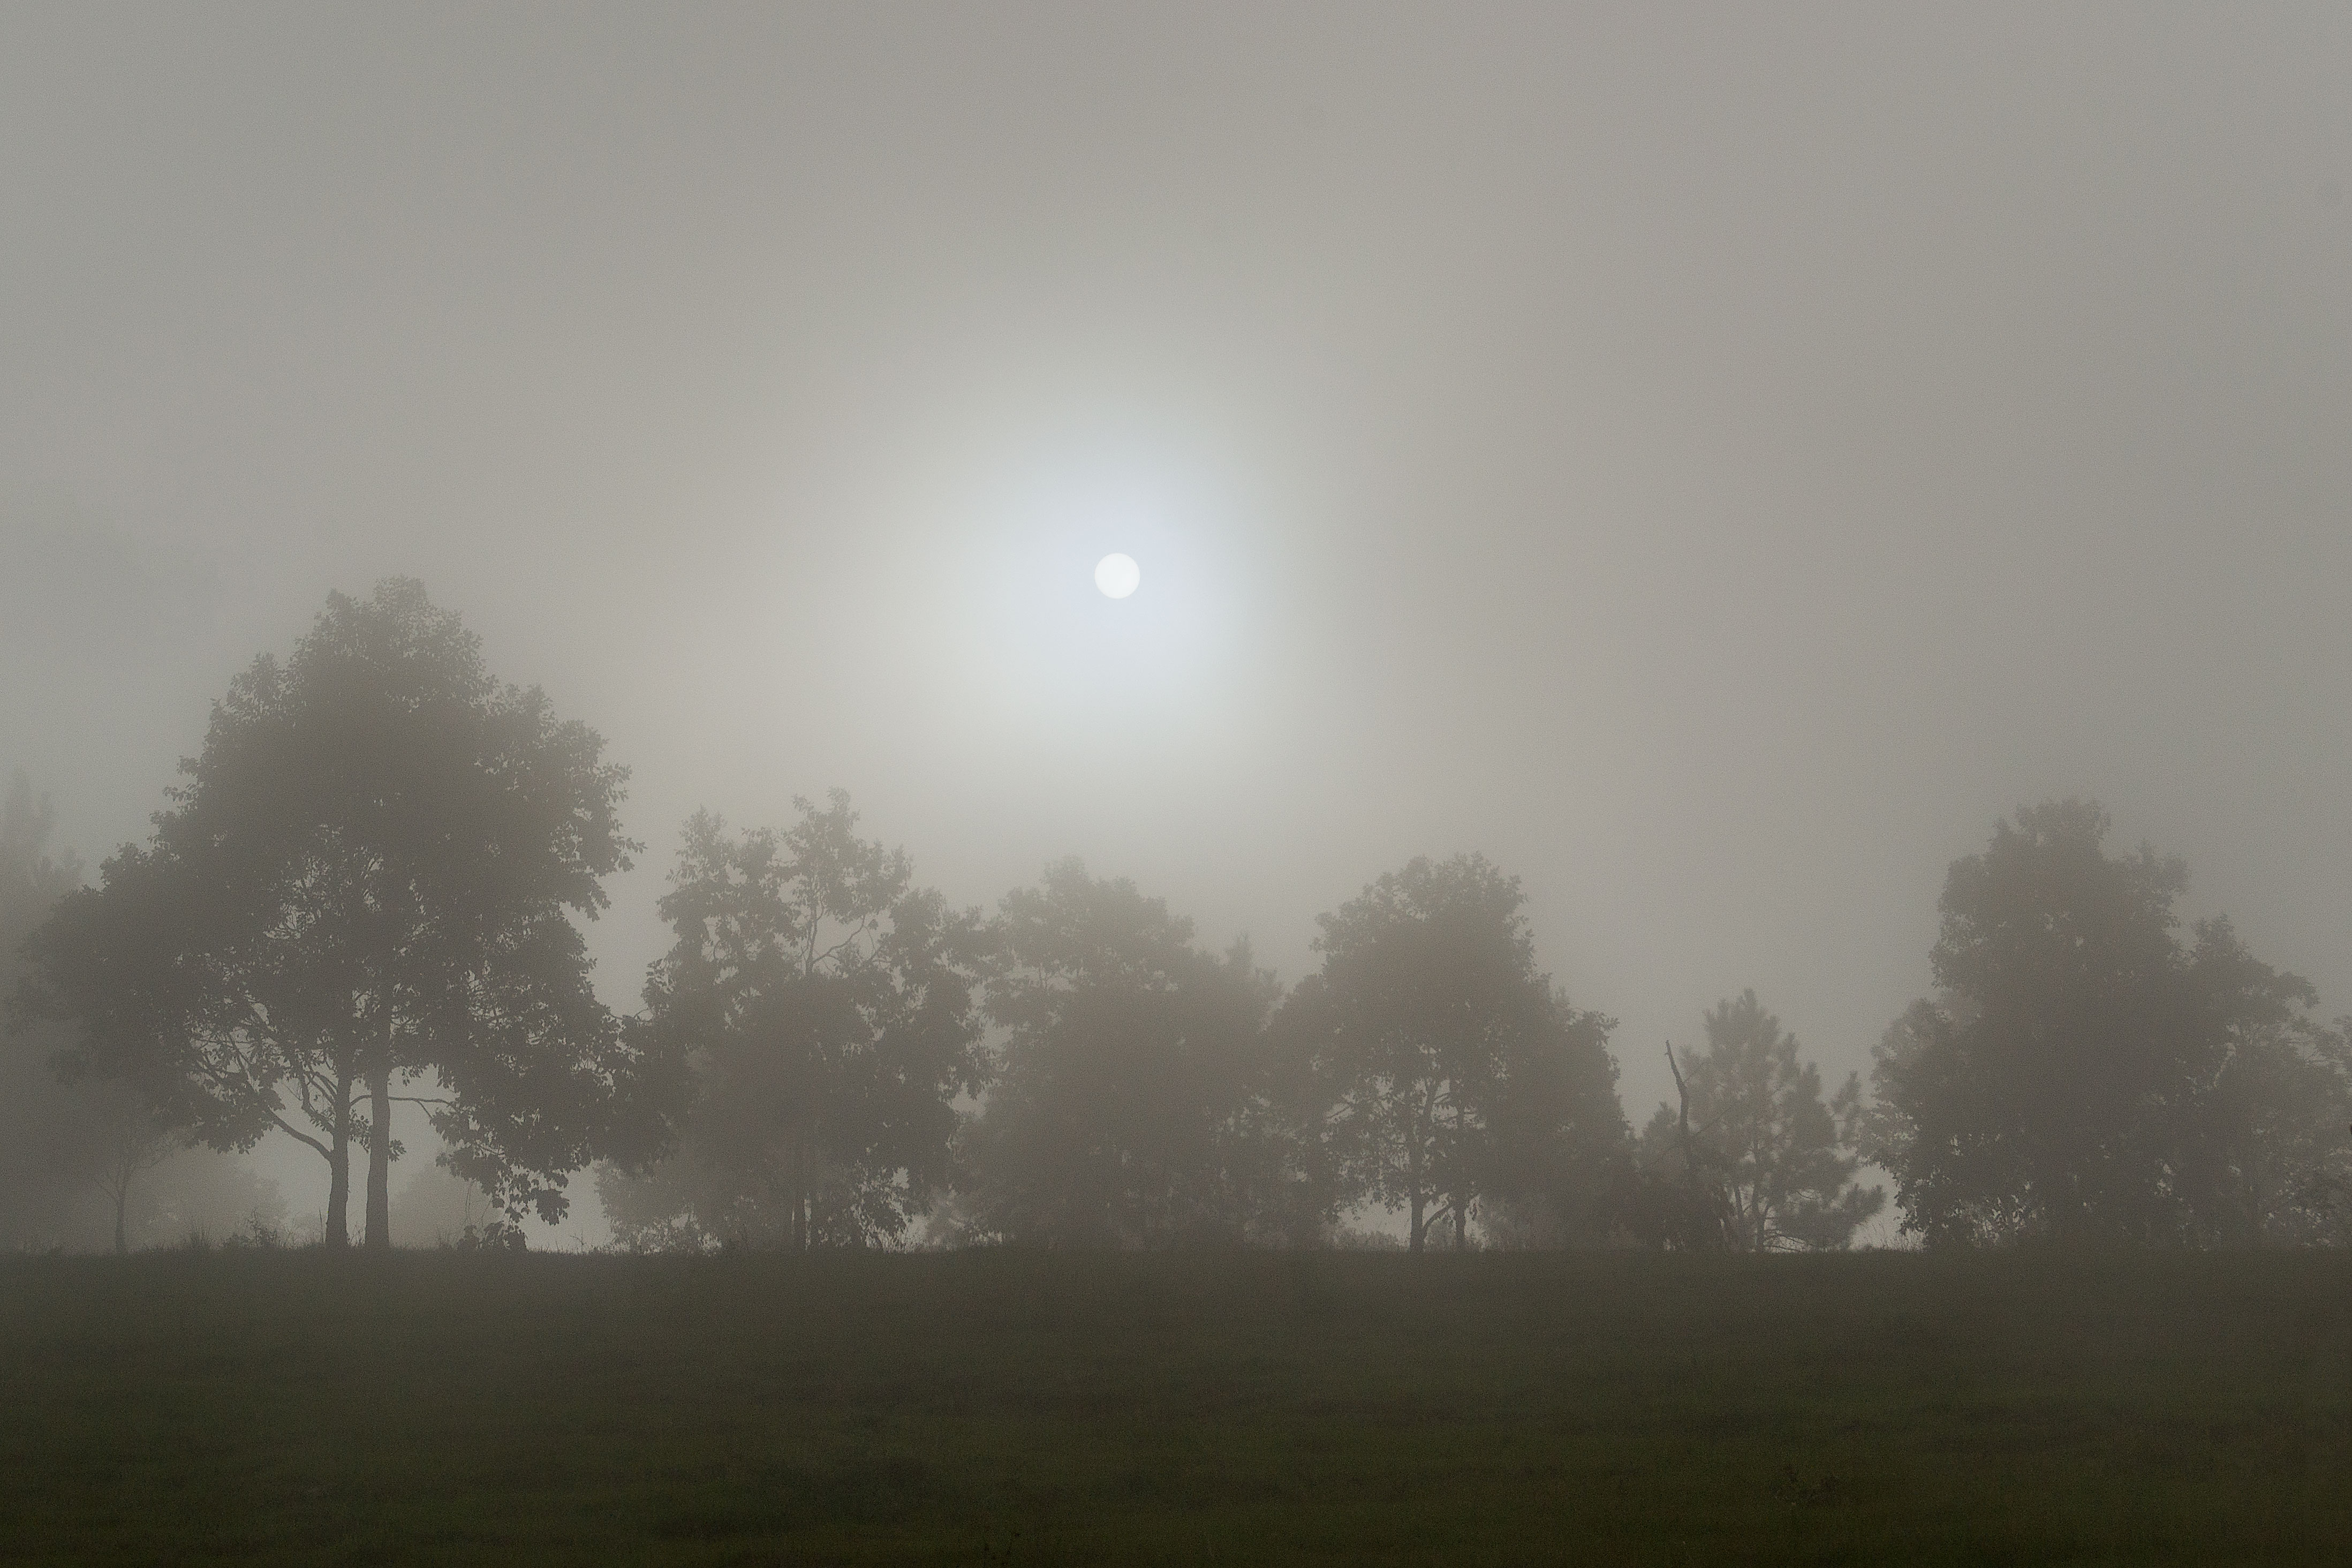 File:A very foggy day.jpg - Wikimedia Commons